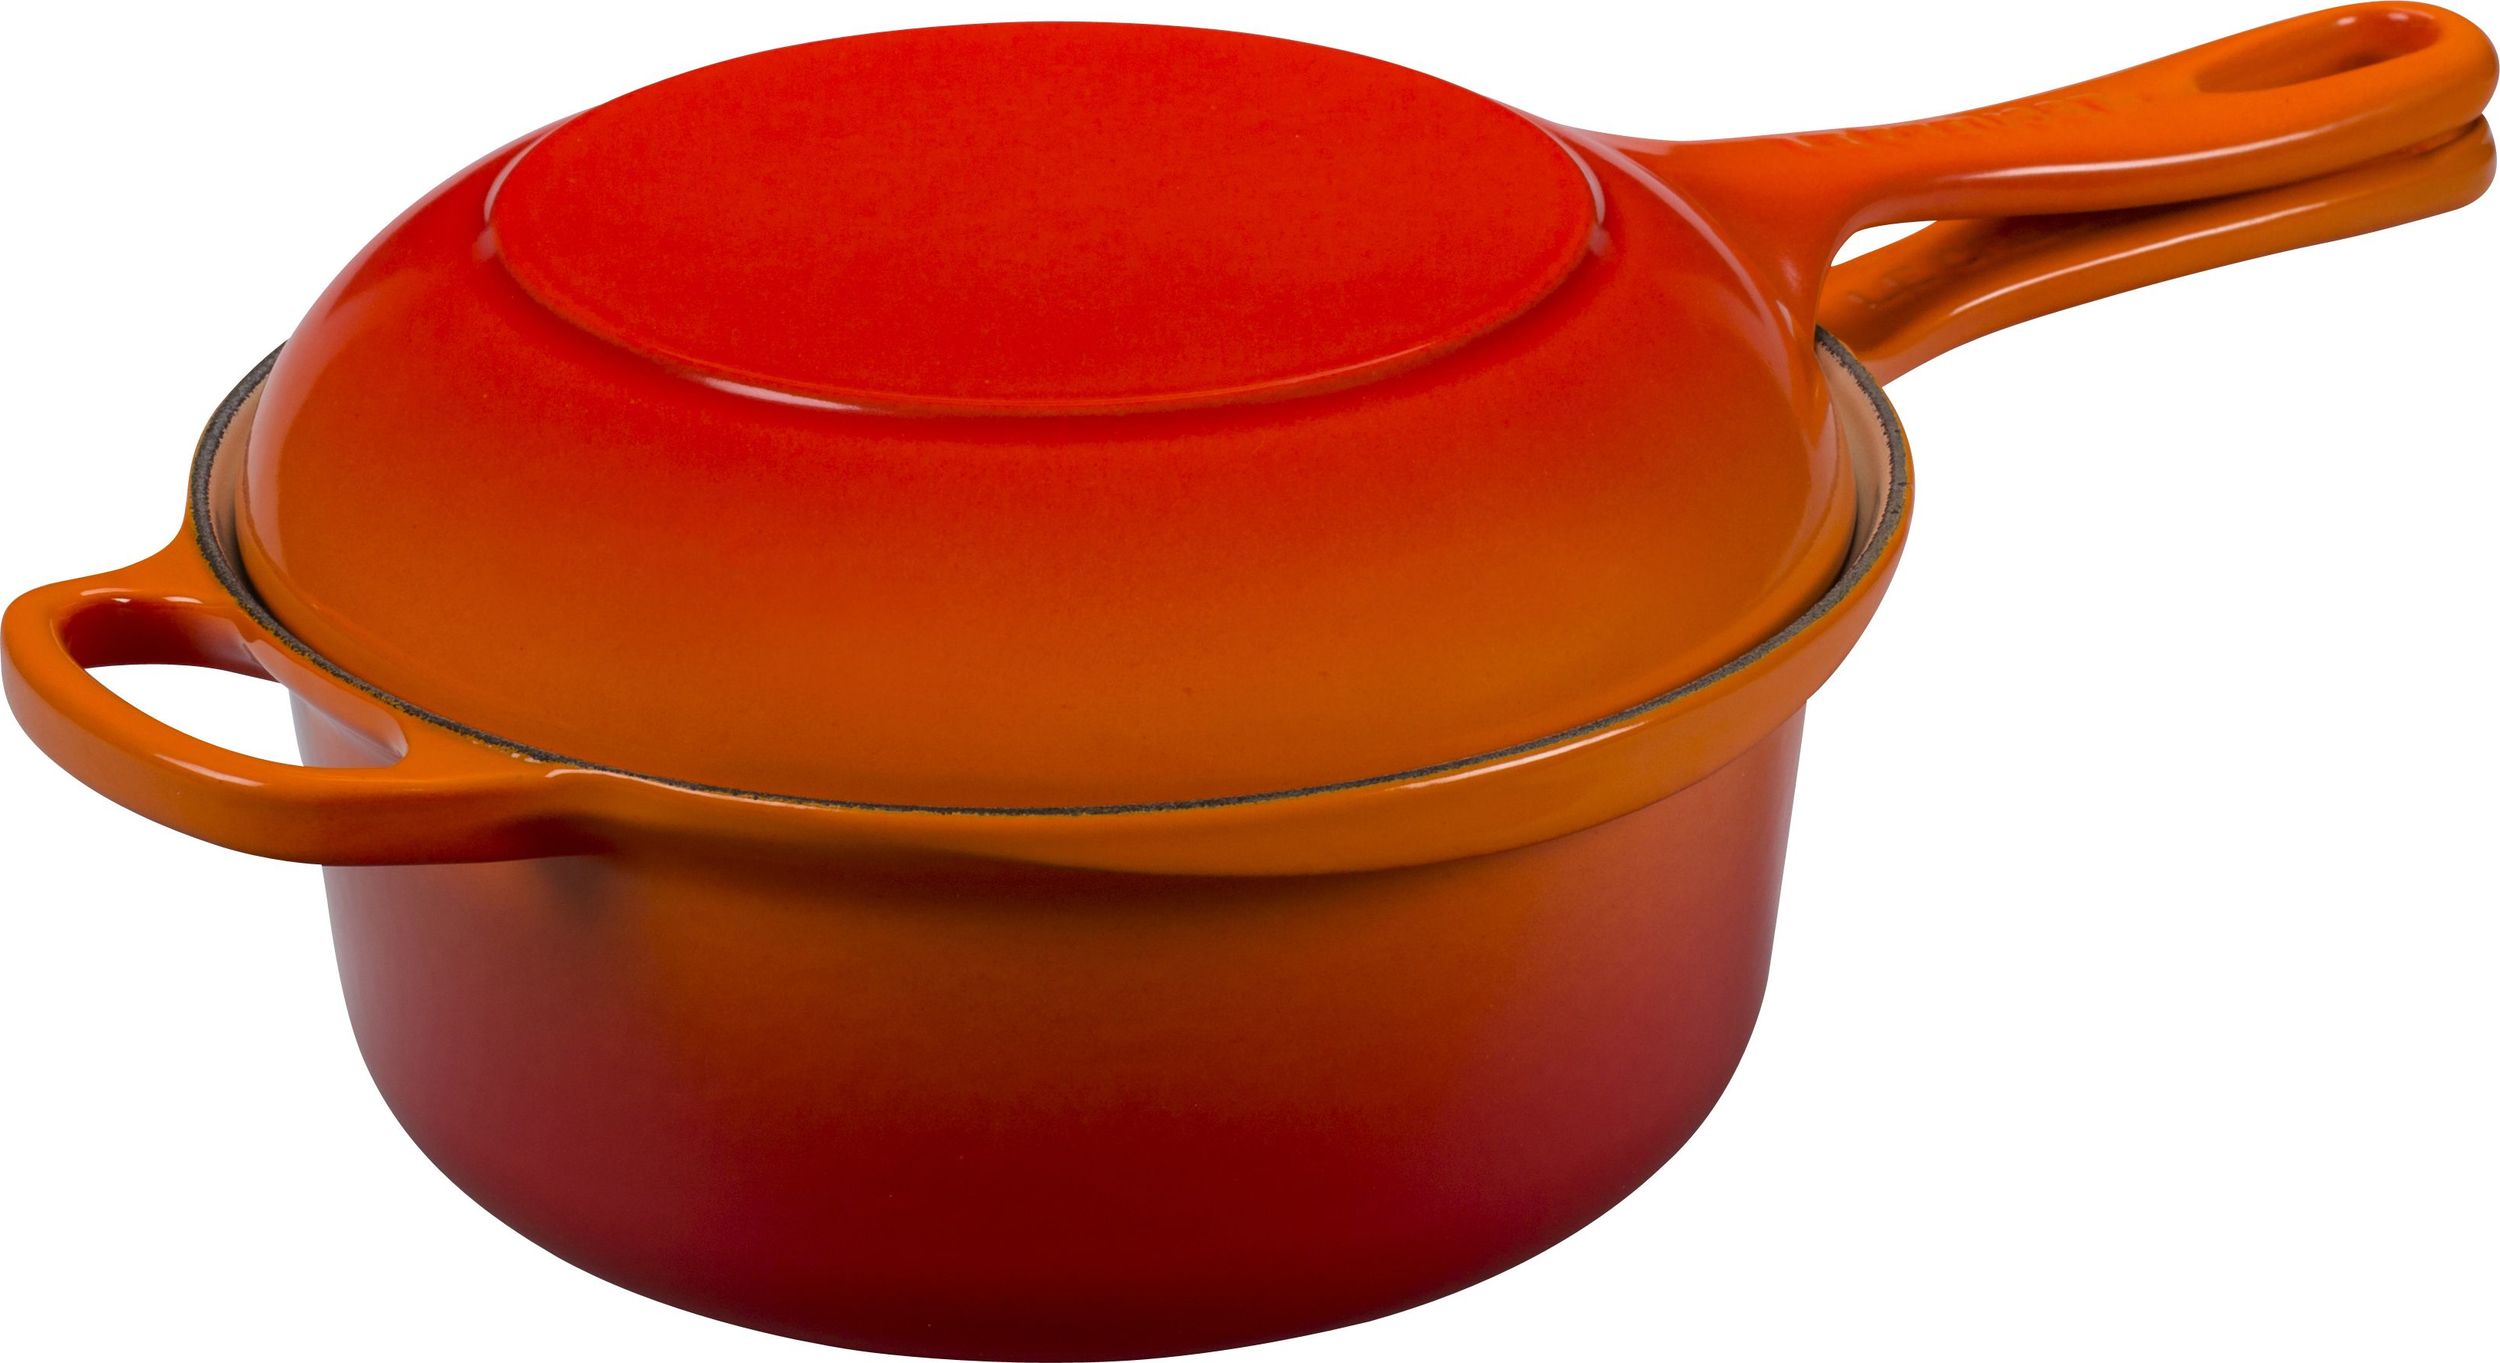 Why You Need the Multifunction Pan from Le Creuset